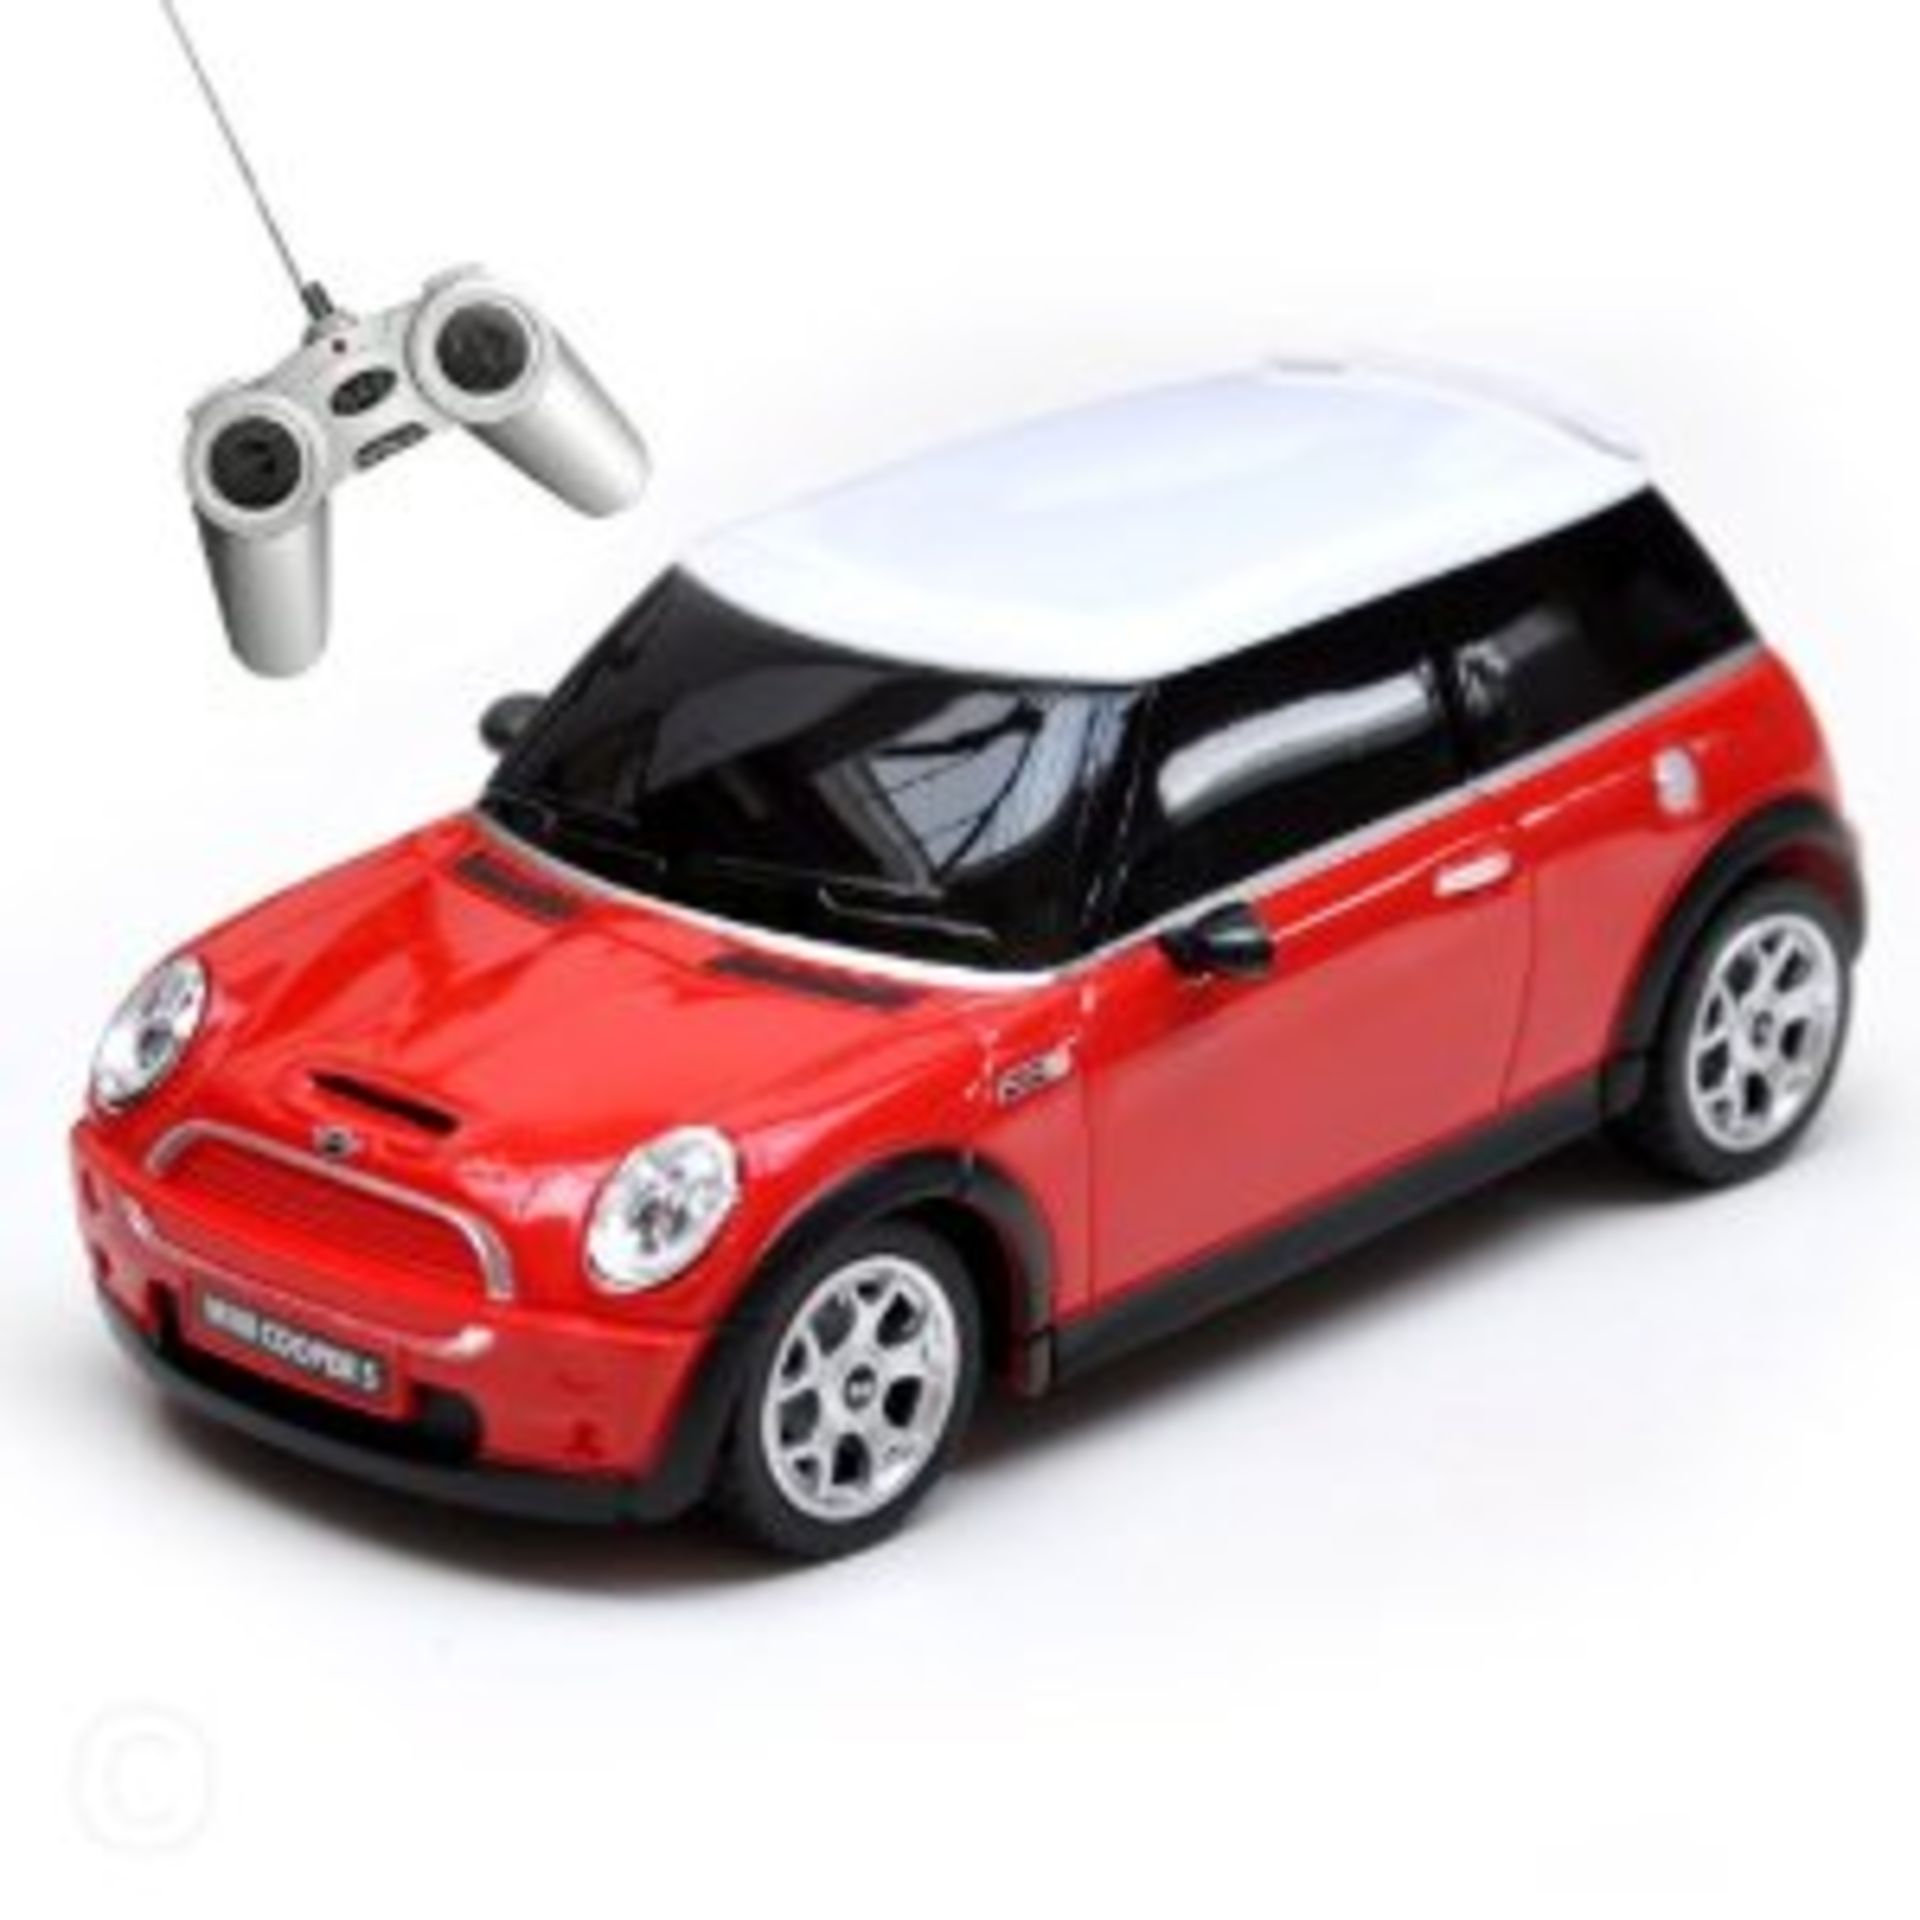 V Brand New 1/24 RC Mini Cooper S Full Function Remote Control Car - Official Merchandise